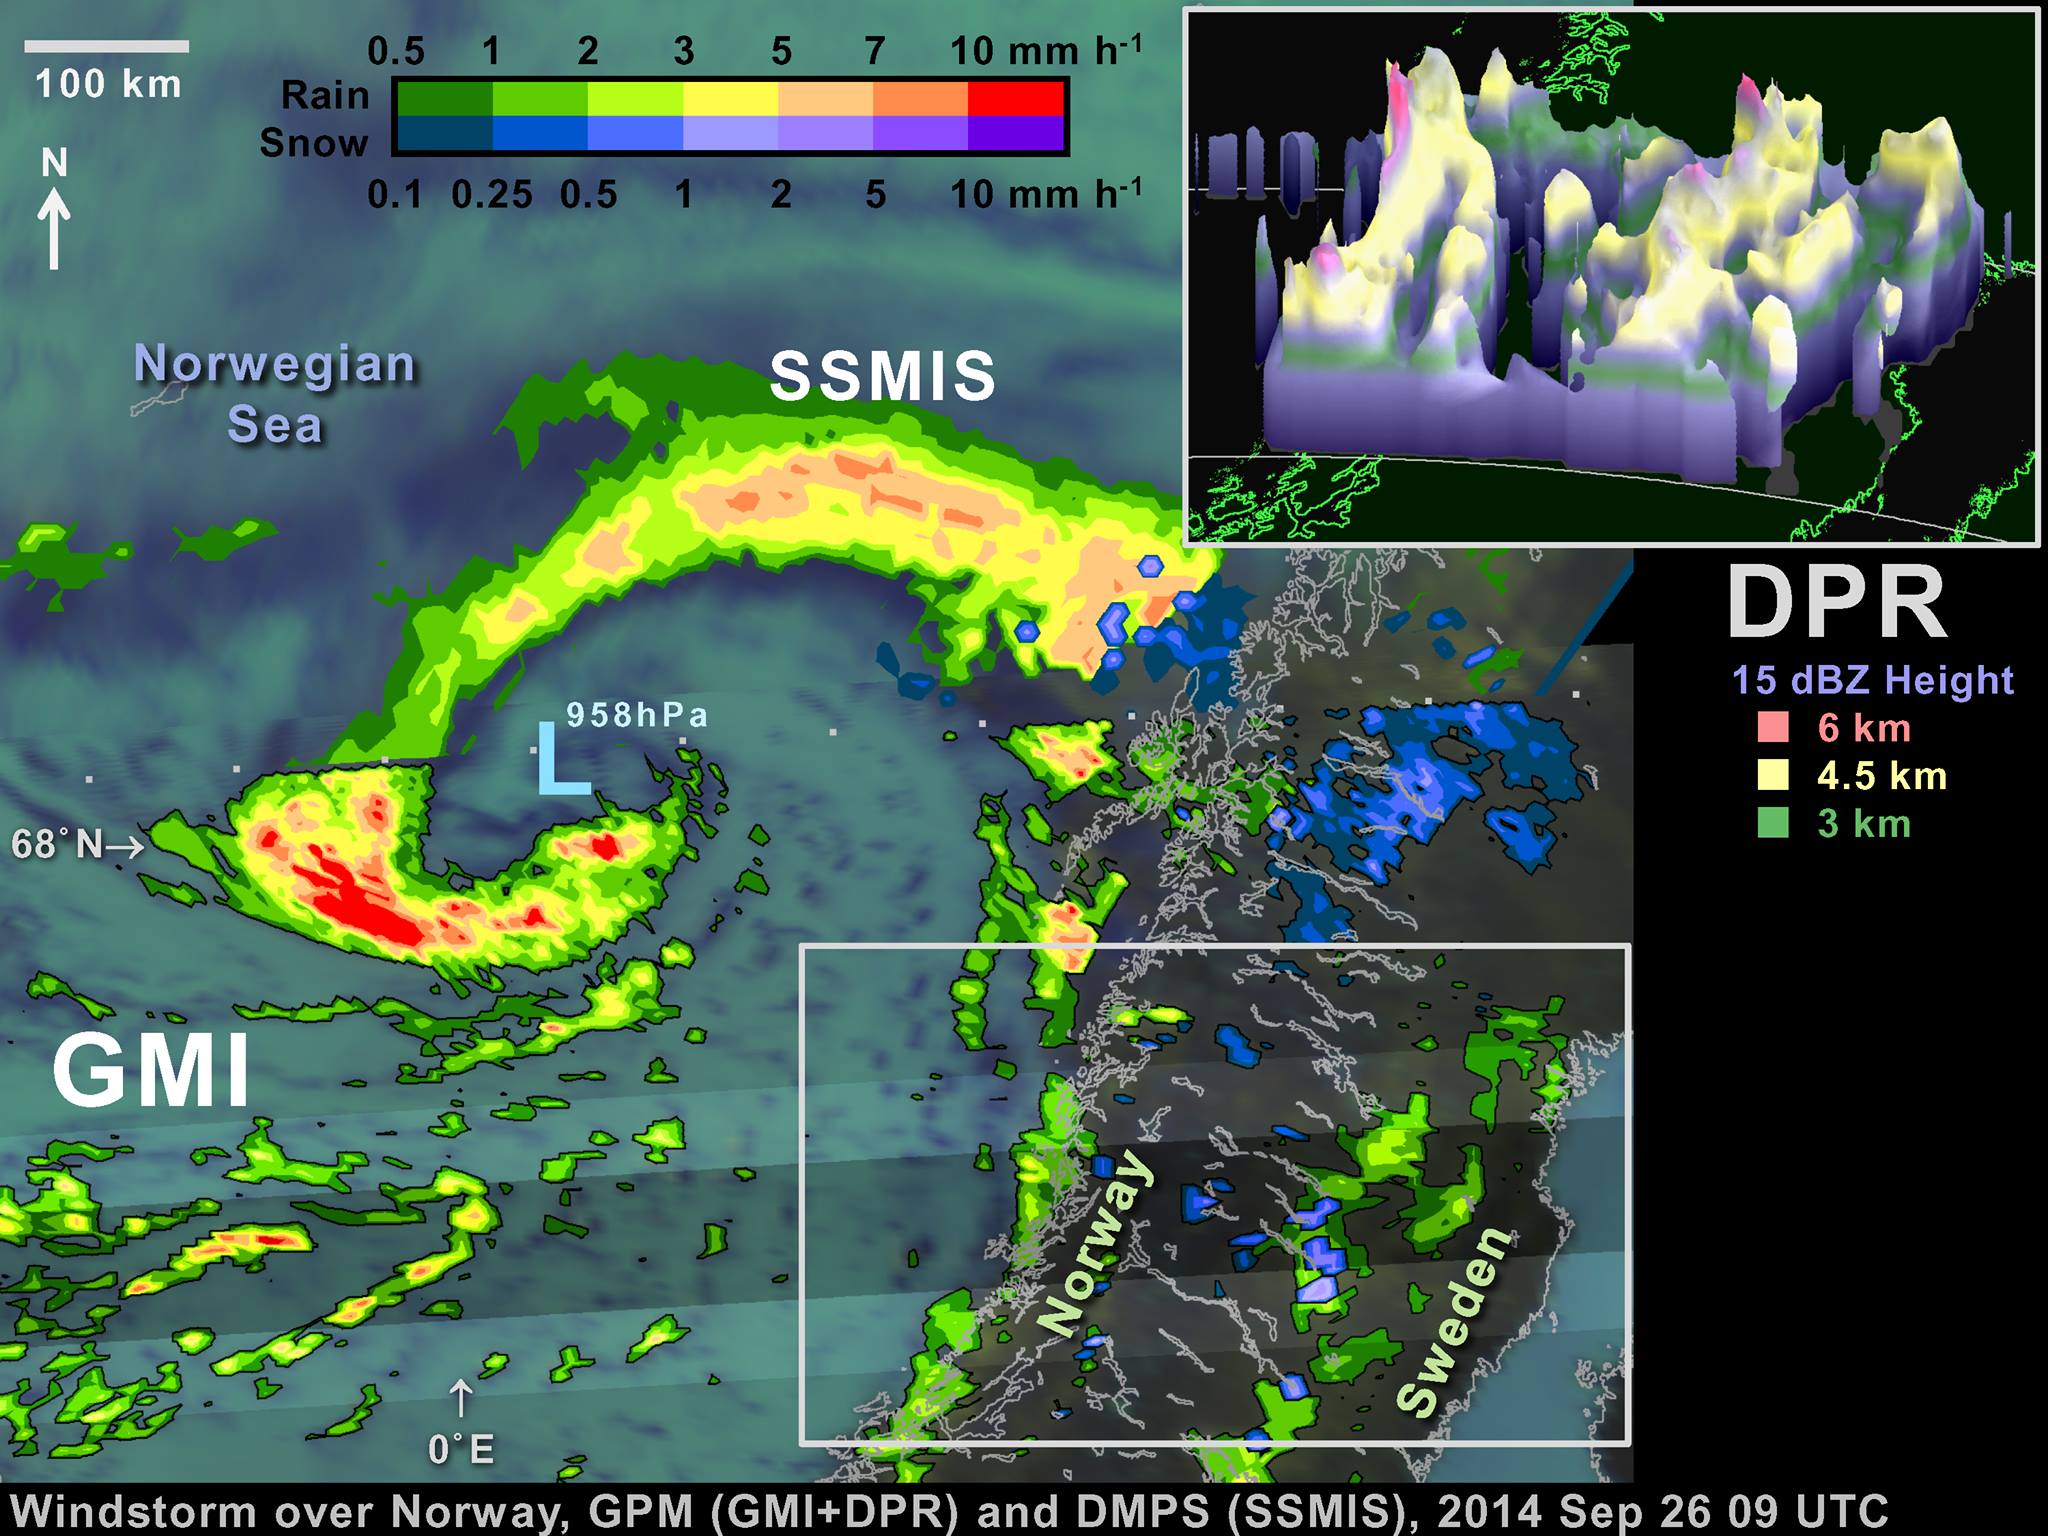 GPM Satellite Sees a Windstorm over Norway